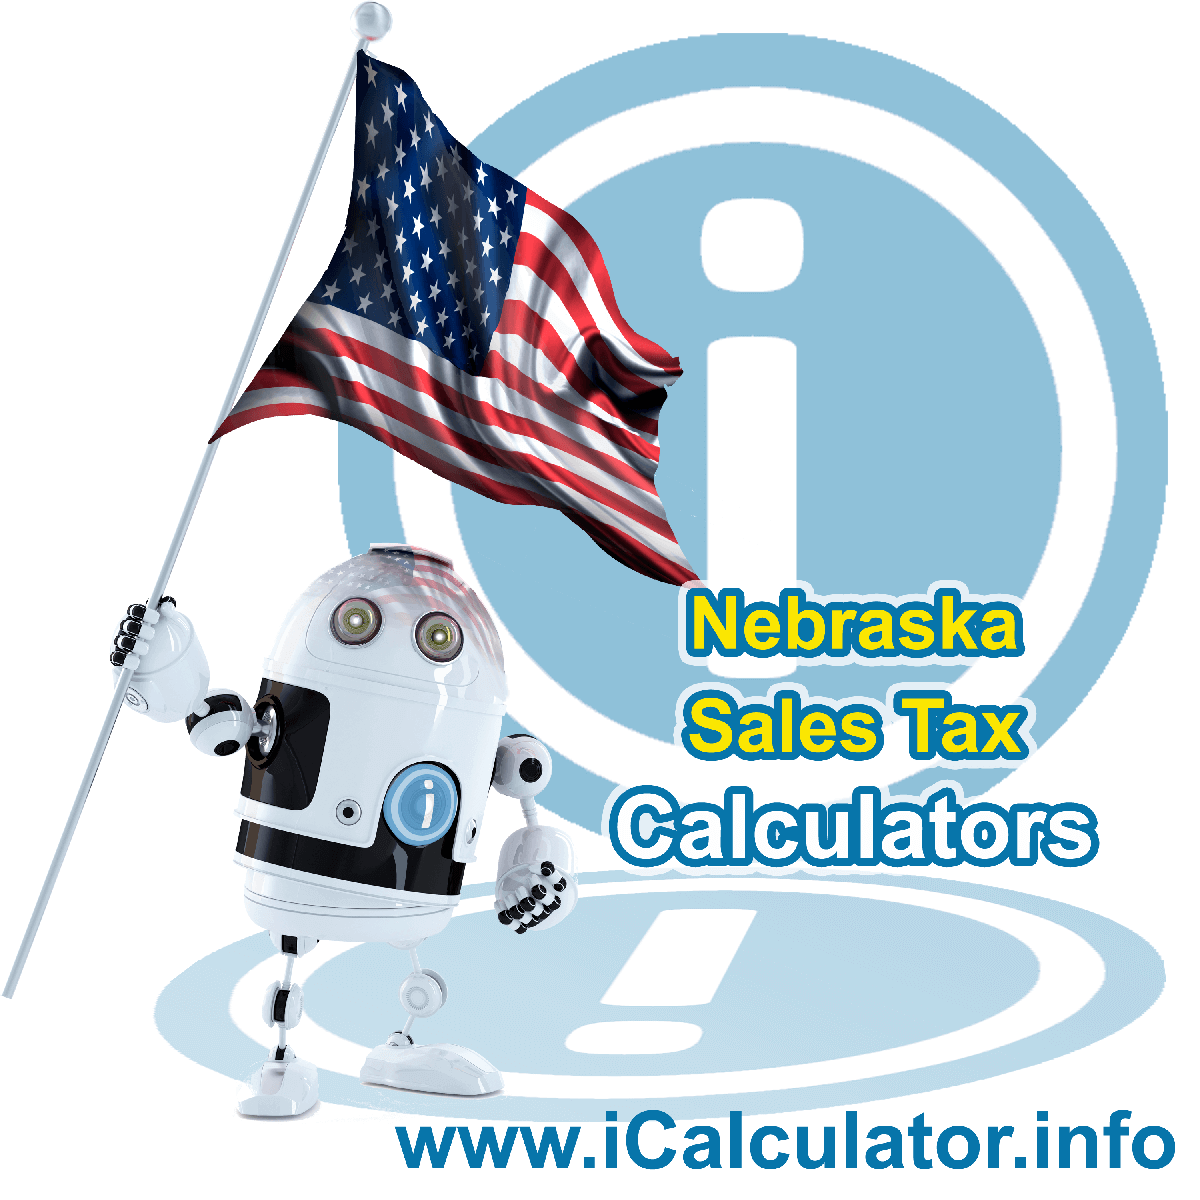 Nebraska Sales Tax Comparison Calculator: This image illustrates a calculator robot comparing sales tax in Nebraska manually using the Nebraska Sales Tax Formula. You can use this information to compare Sales Tax manually or use the Nebraska Sales Tax Comparison Calculator to calculate and compare Nebraska sales tax online.